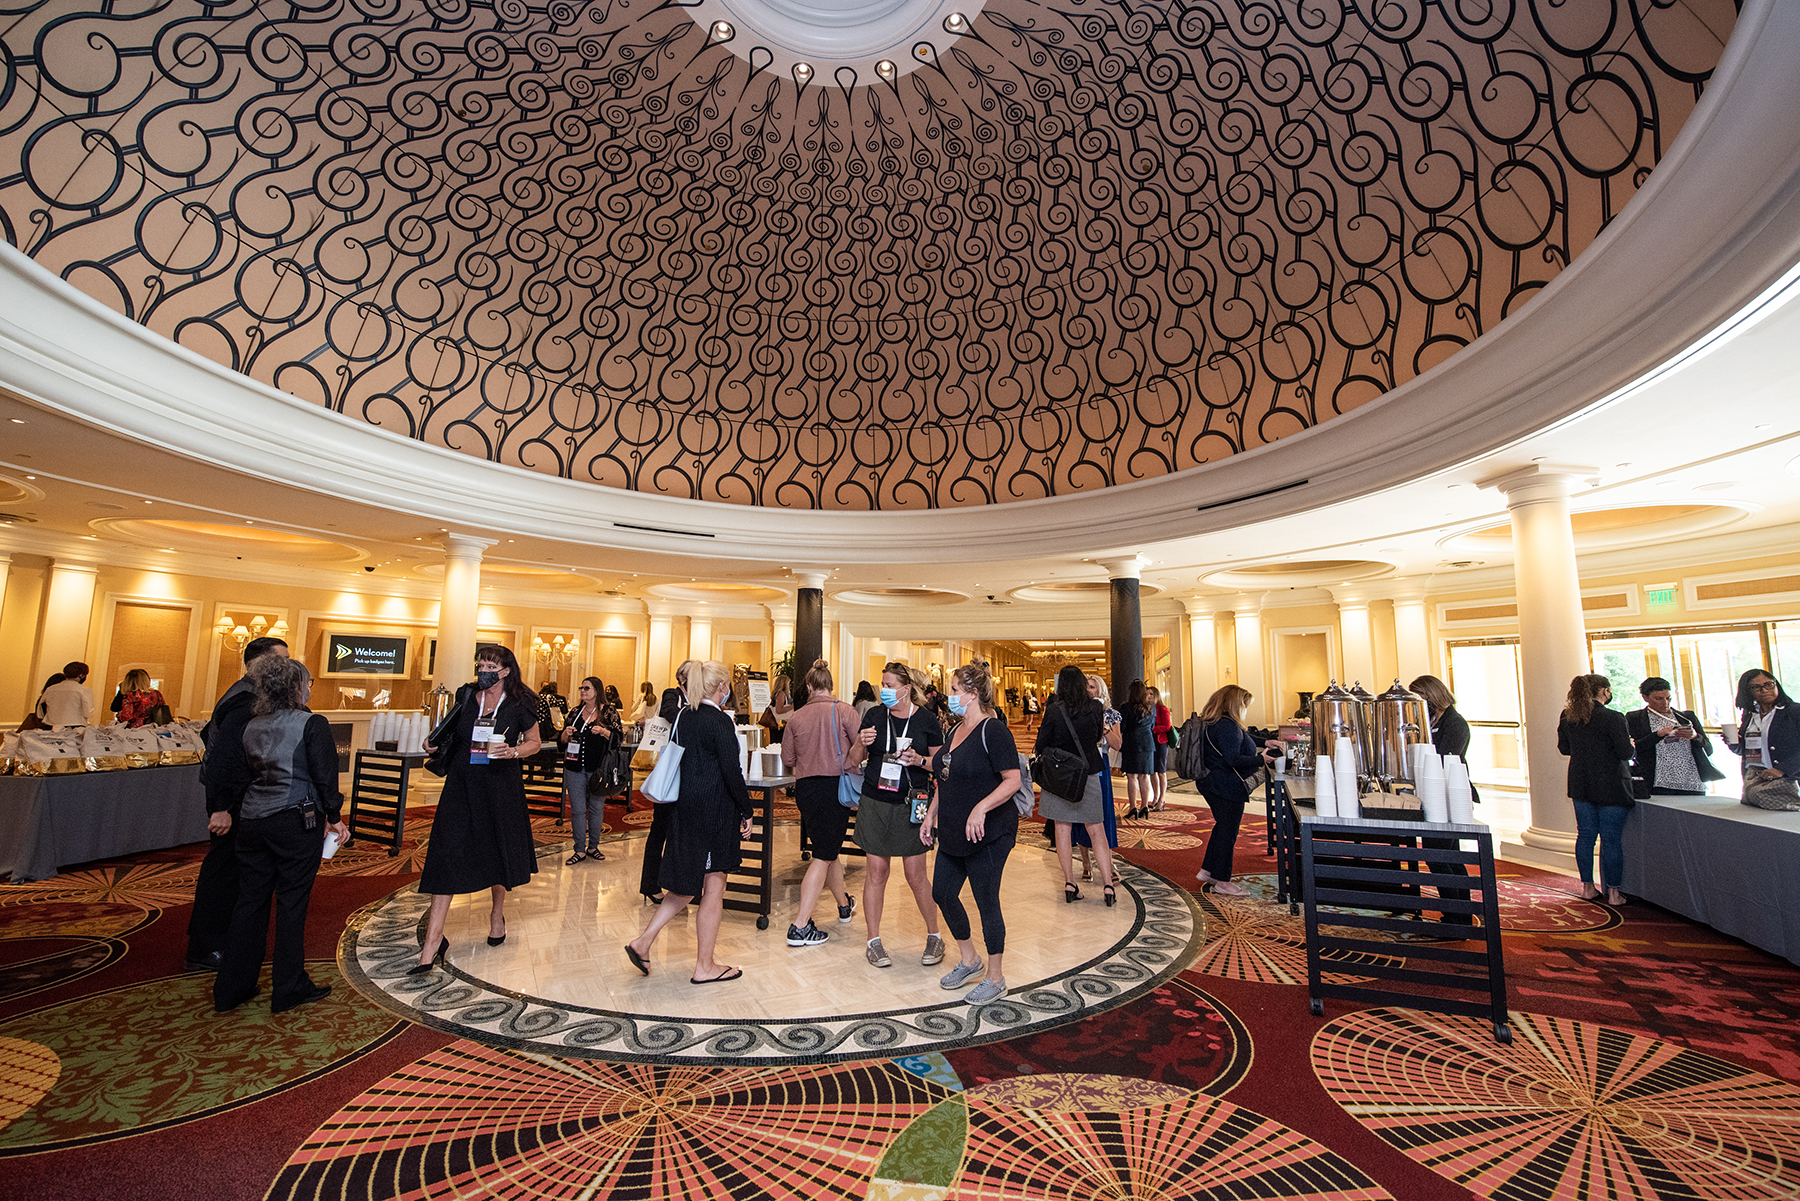 attendees walking around hotel convention room with domed ceiling.